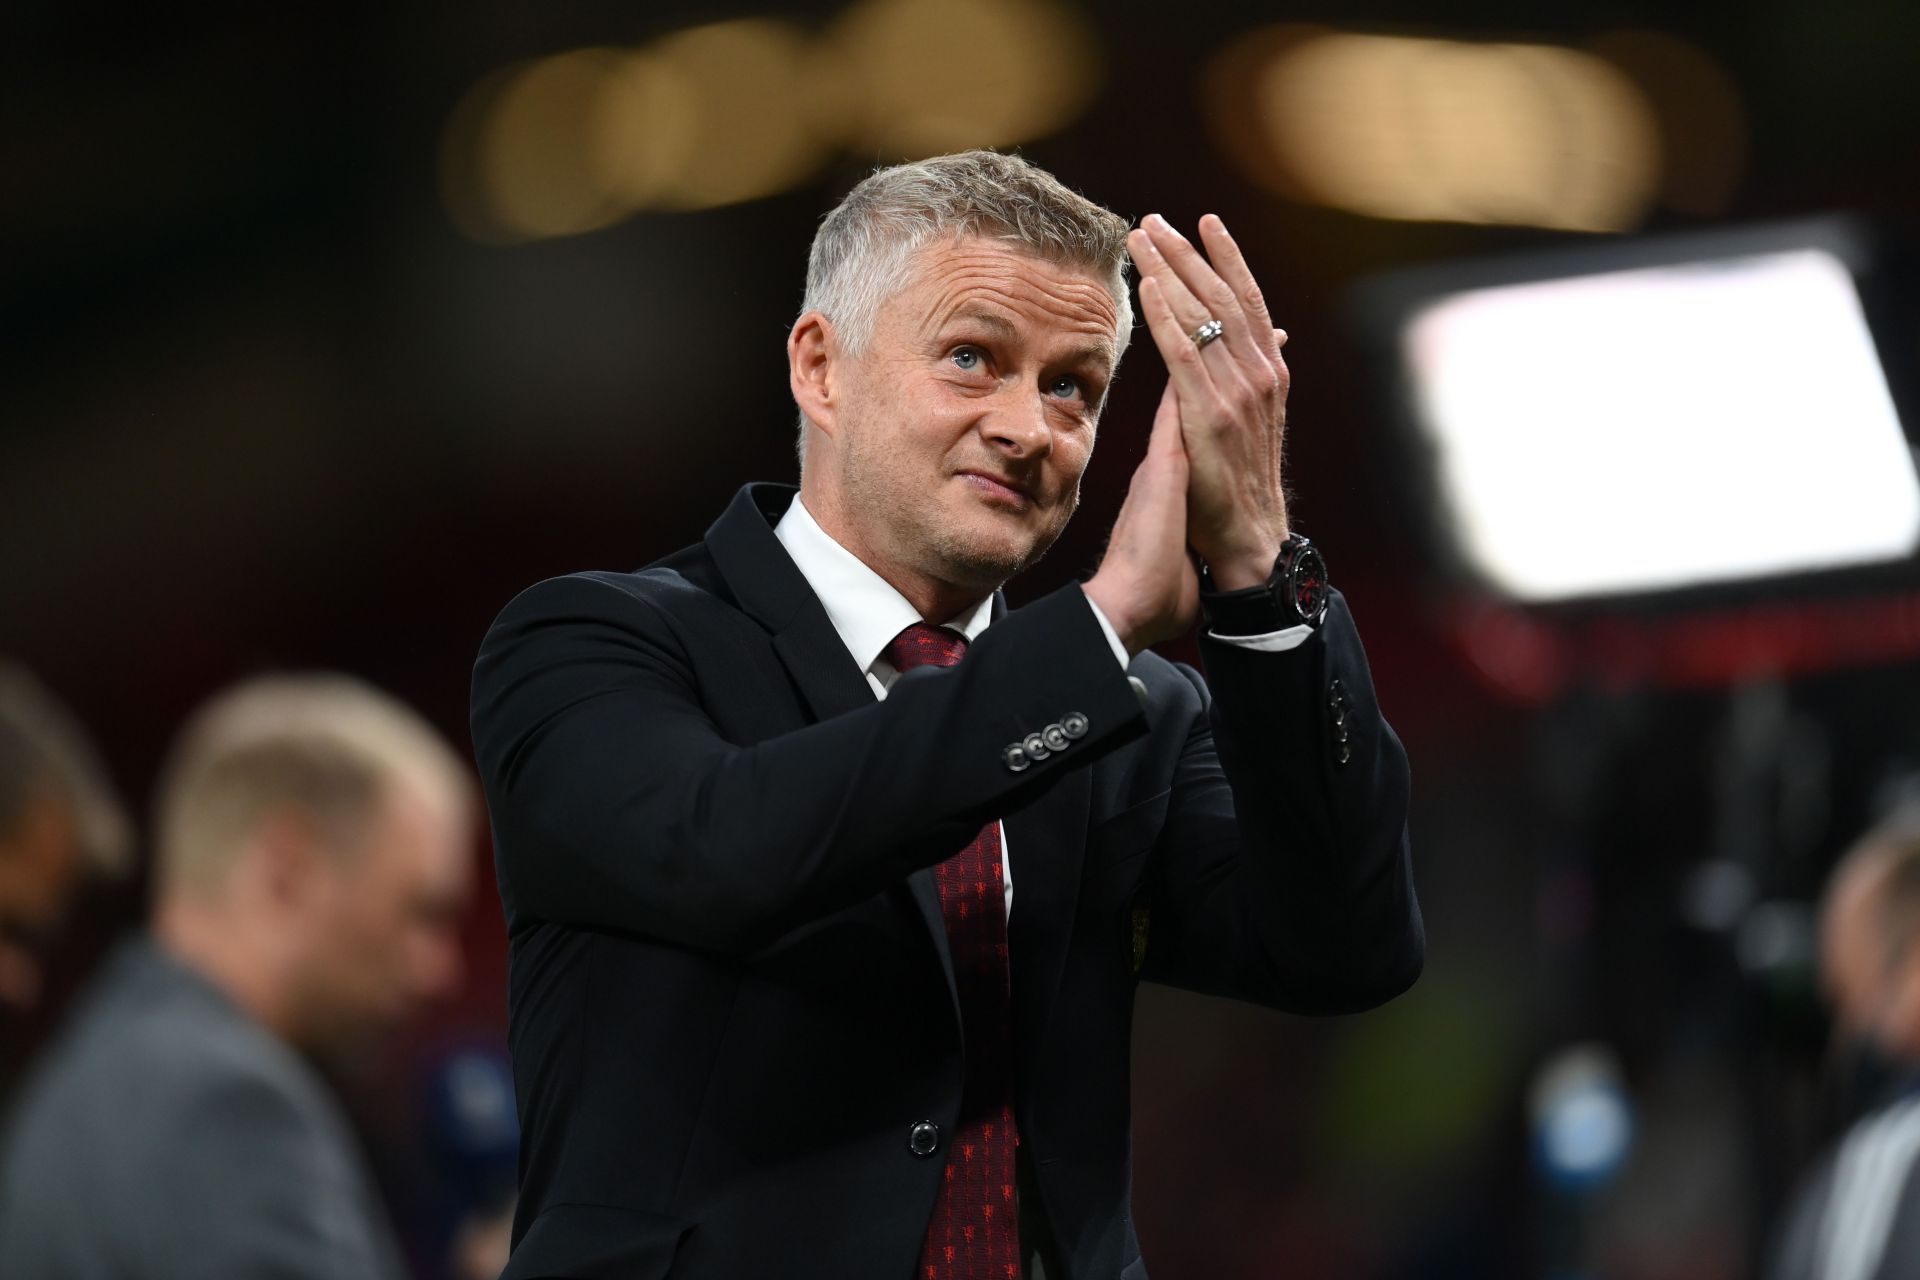 Jamie Carragher believes Ole Gunnar Solskjaer is not good enough for Manchester United.